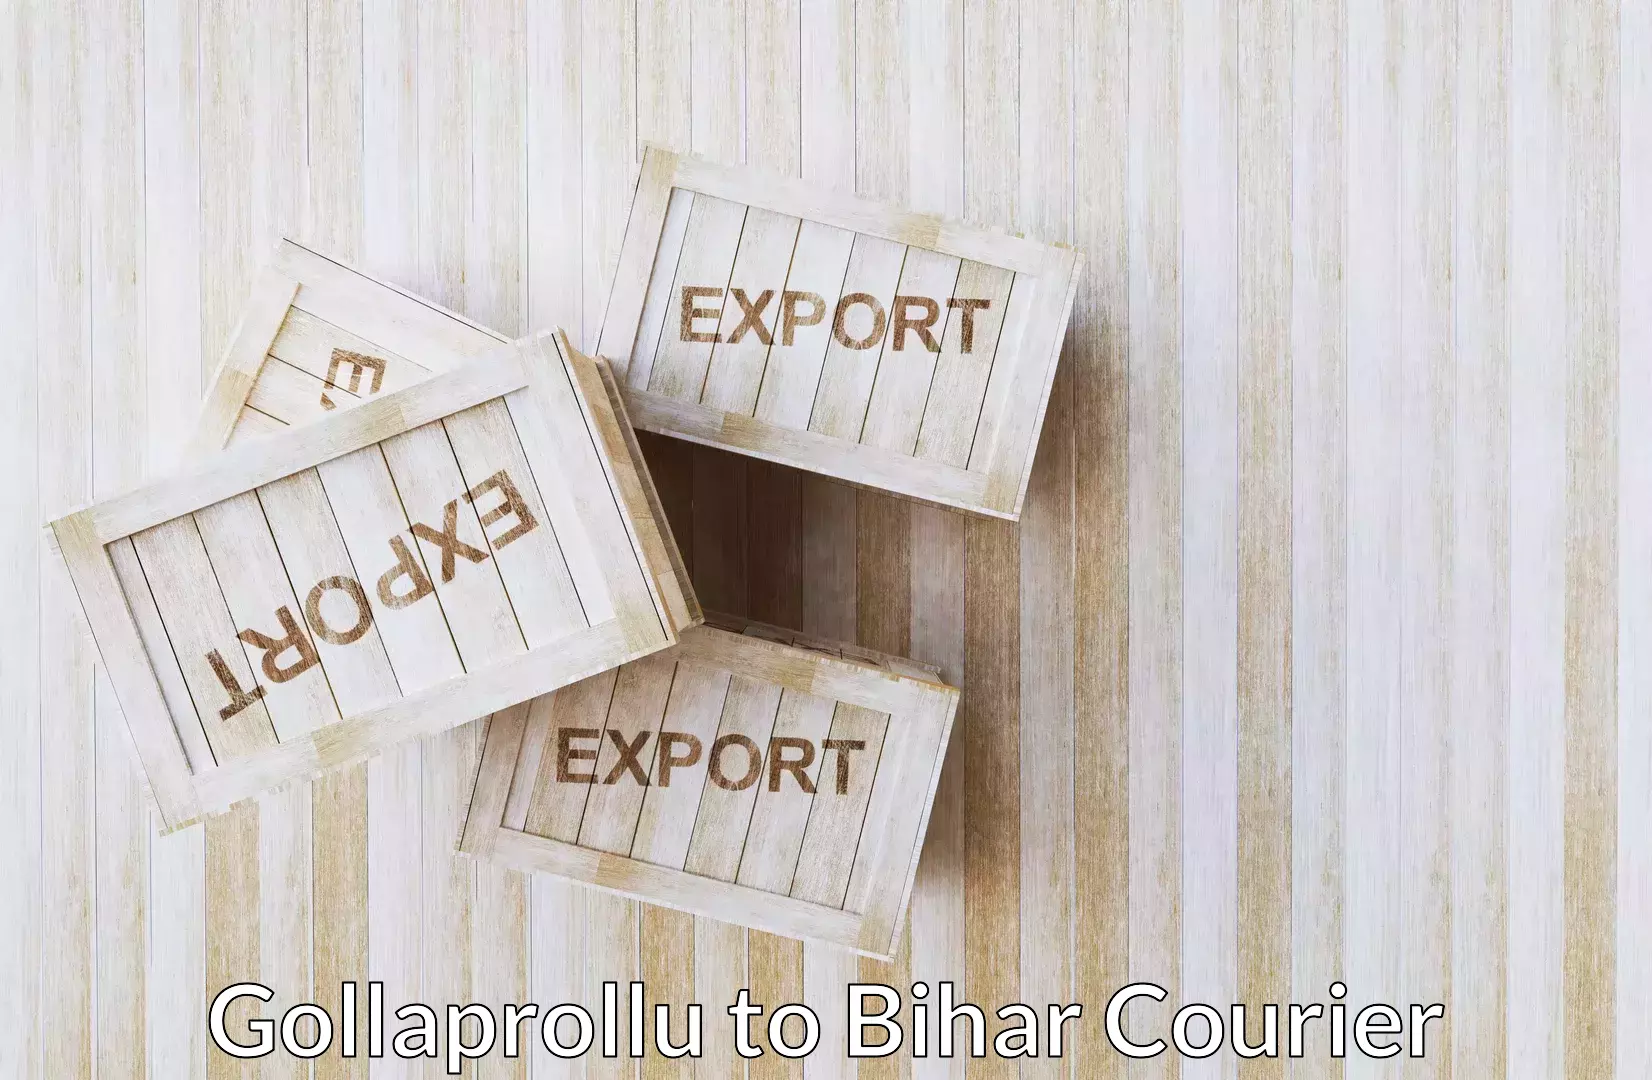 Affordable relocation solutions Gollaprollu to Bihar